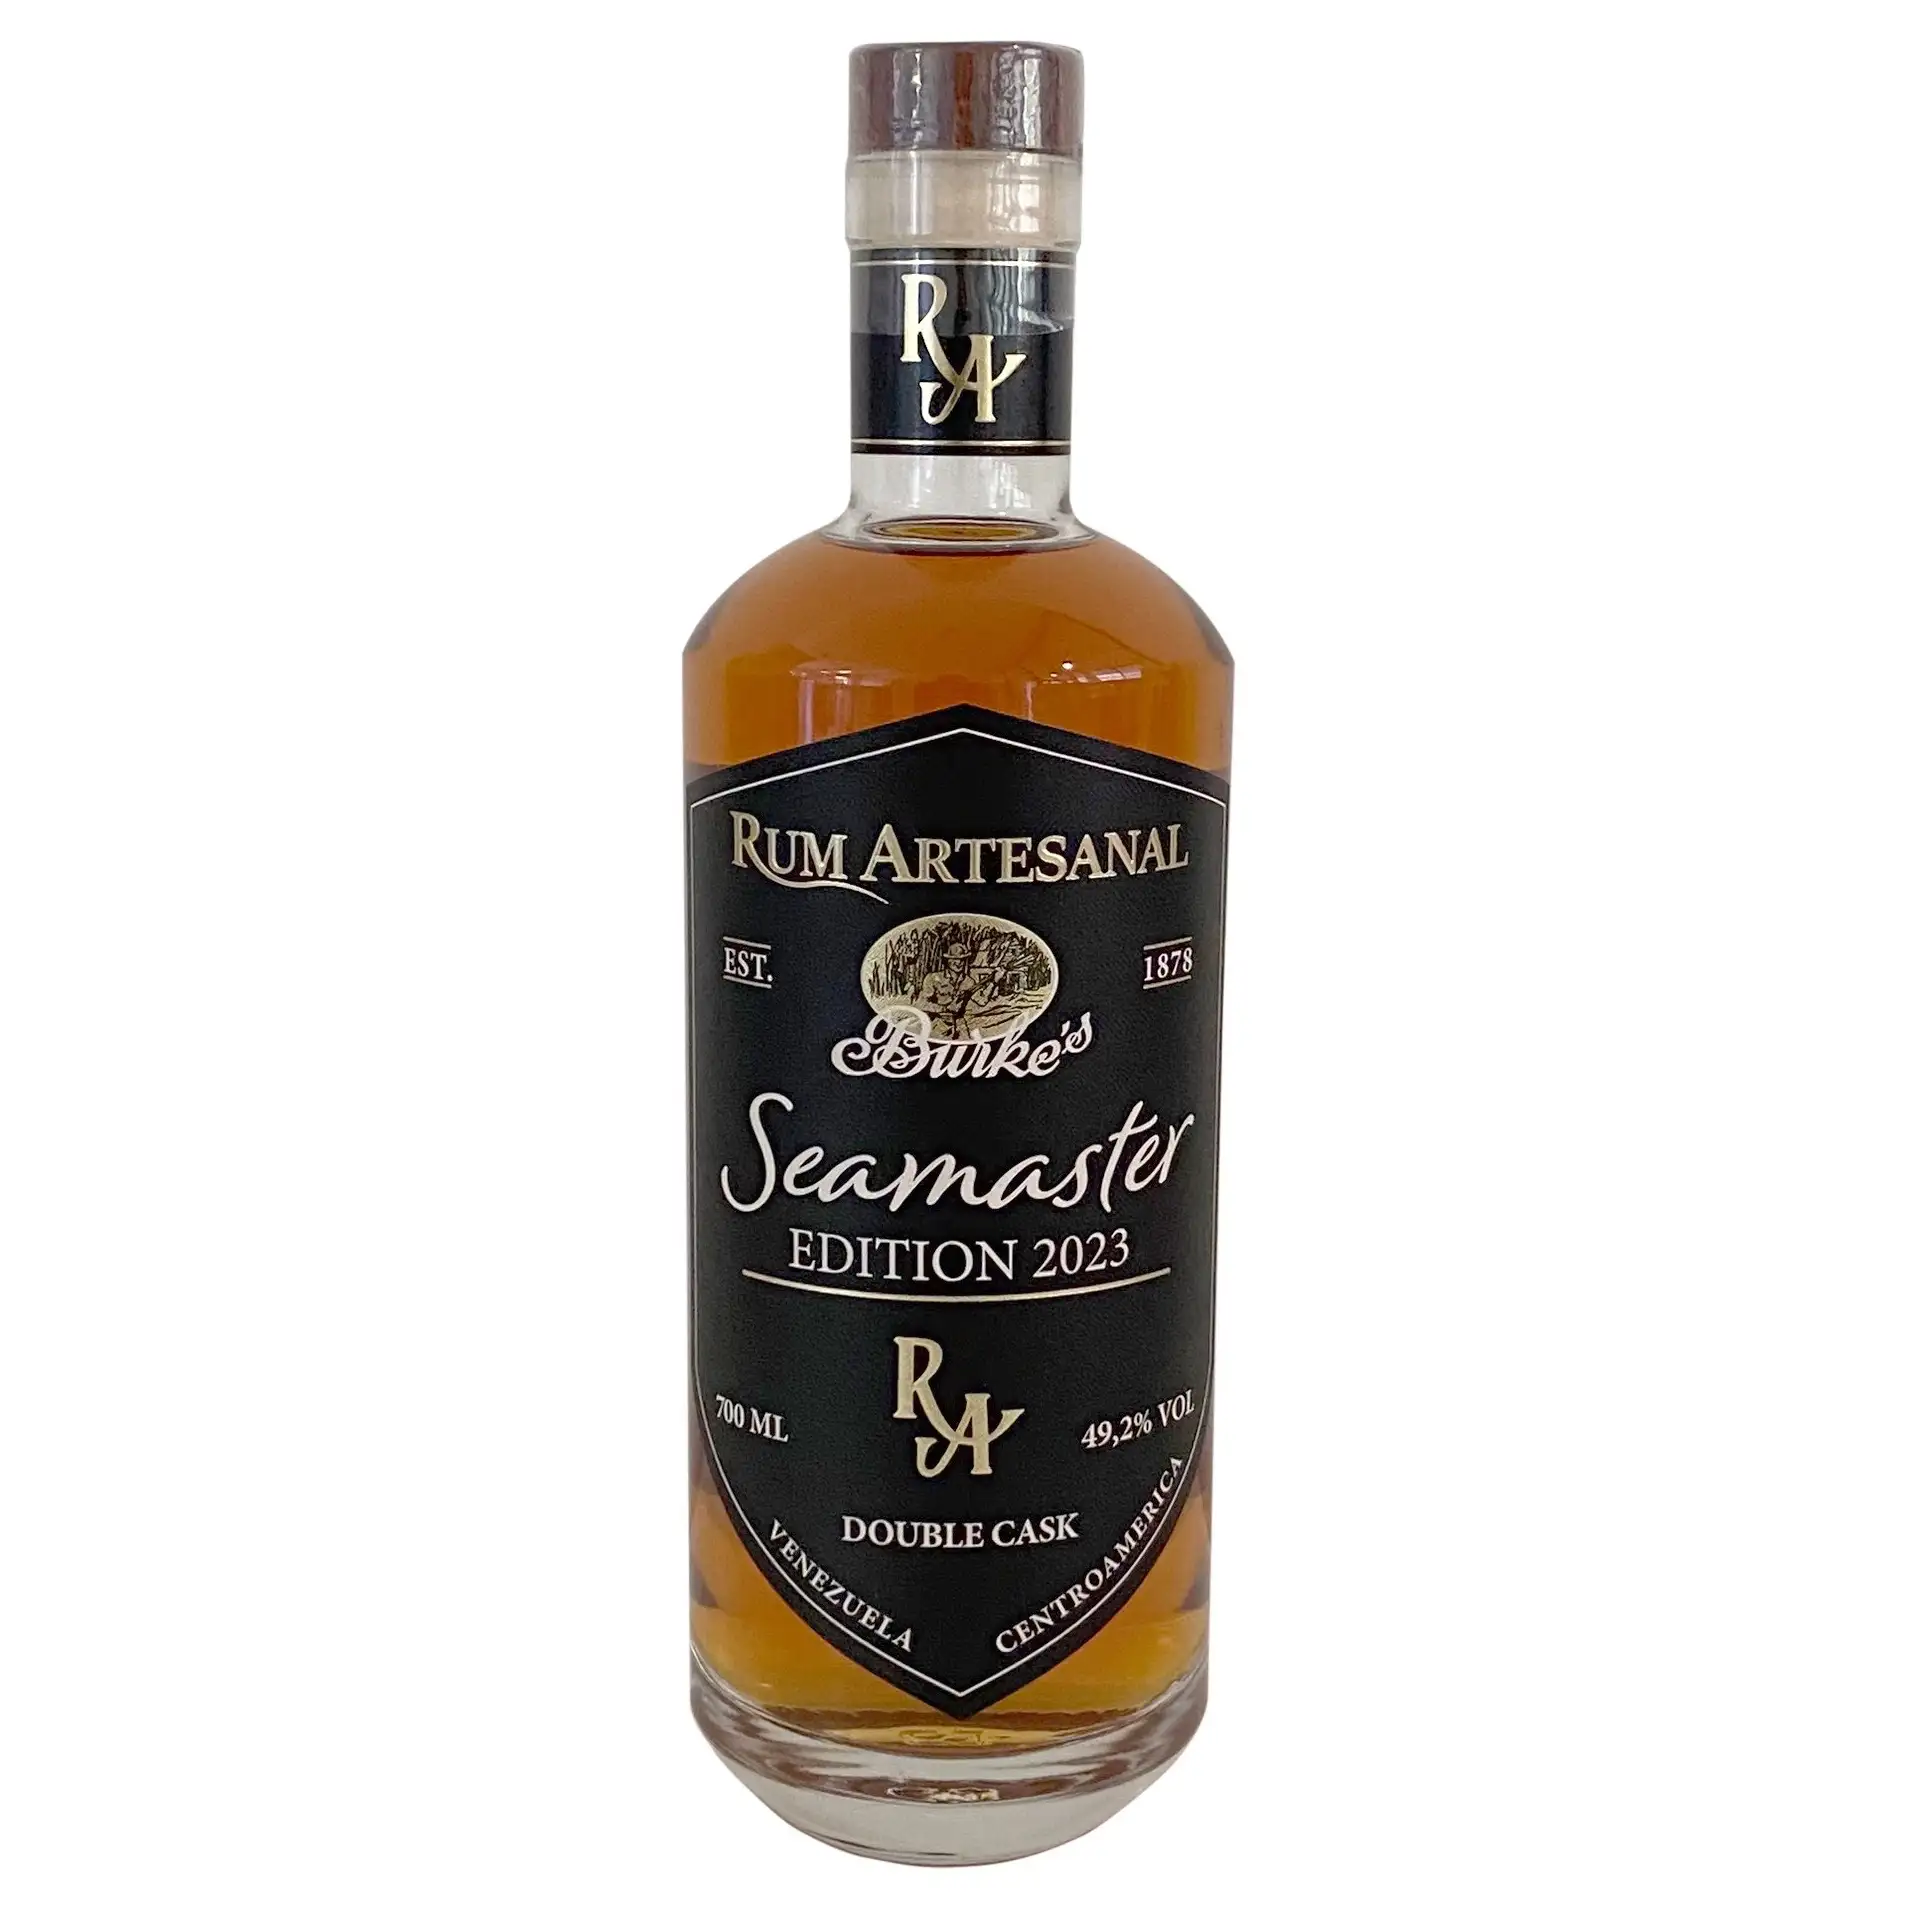 Image of the front of the bottle of the rum Rum Artesanal Burke‘s Seamaster Edition 2023